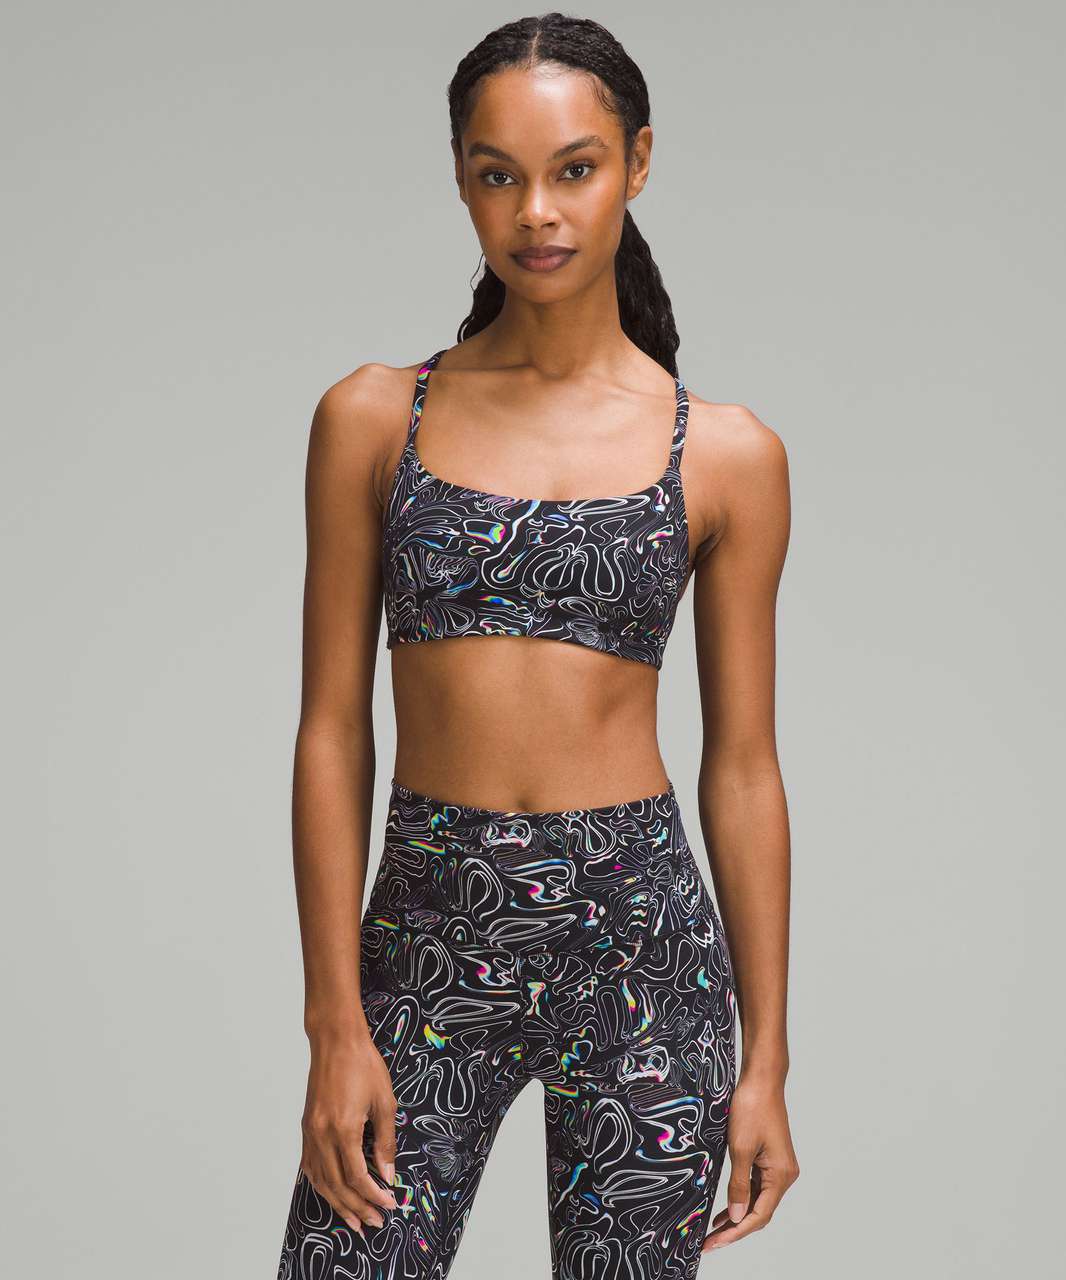 Lululemon Wunder Train Strappy Racer Bra *Light Support, A/B Cup